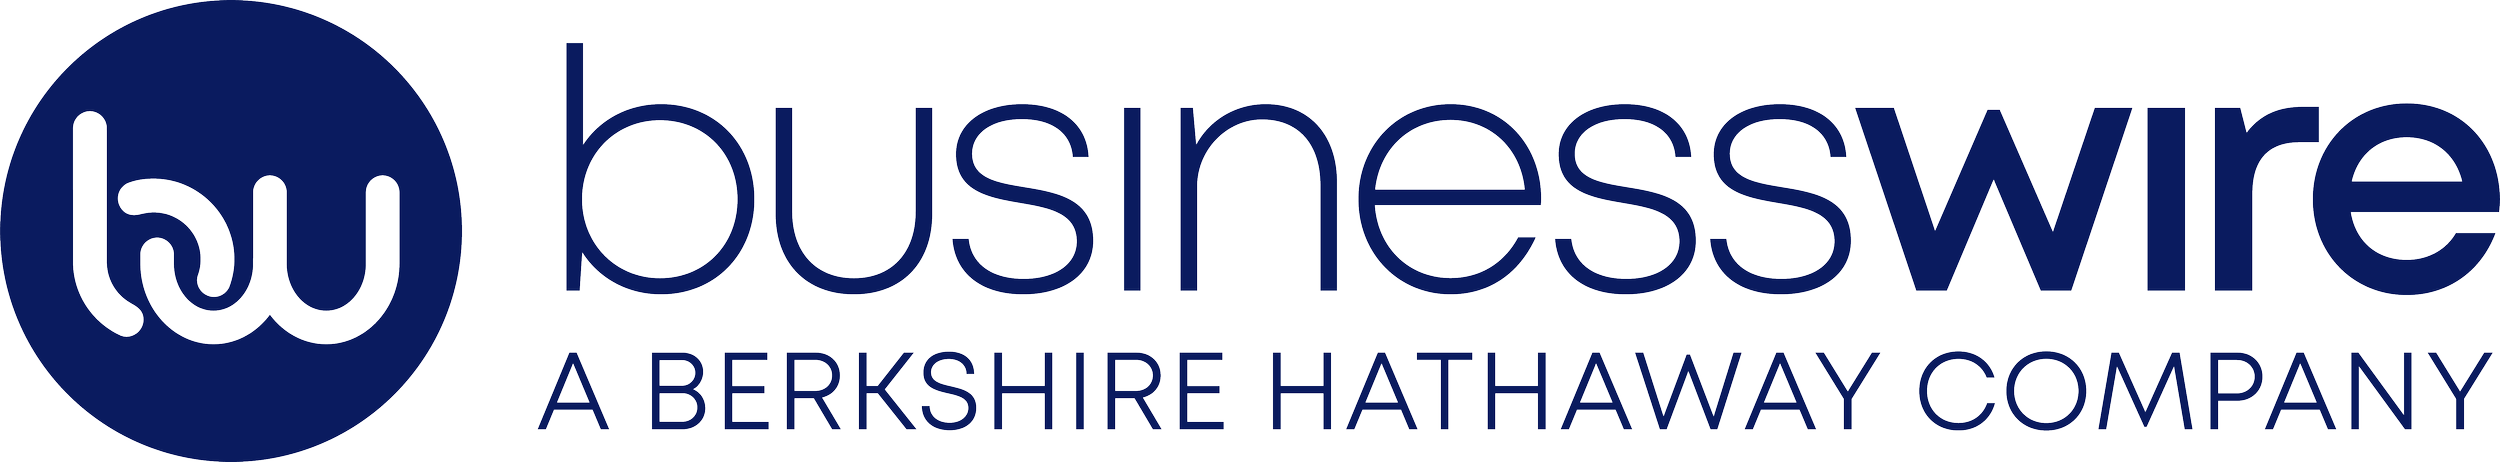 Business-Wire-Logo-Small-Navy.png